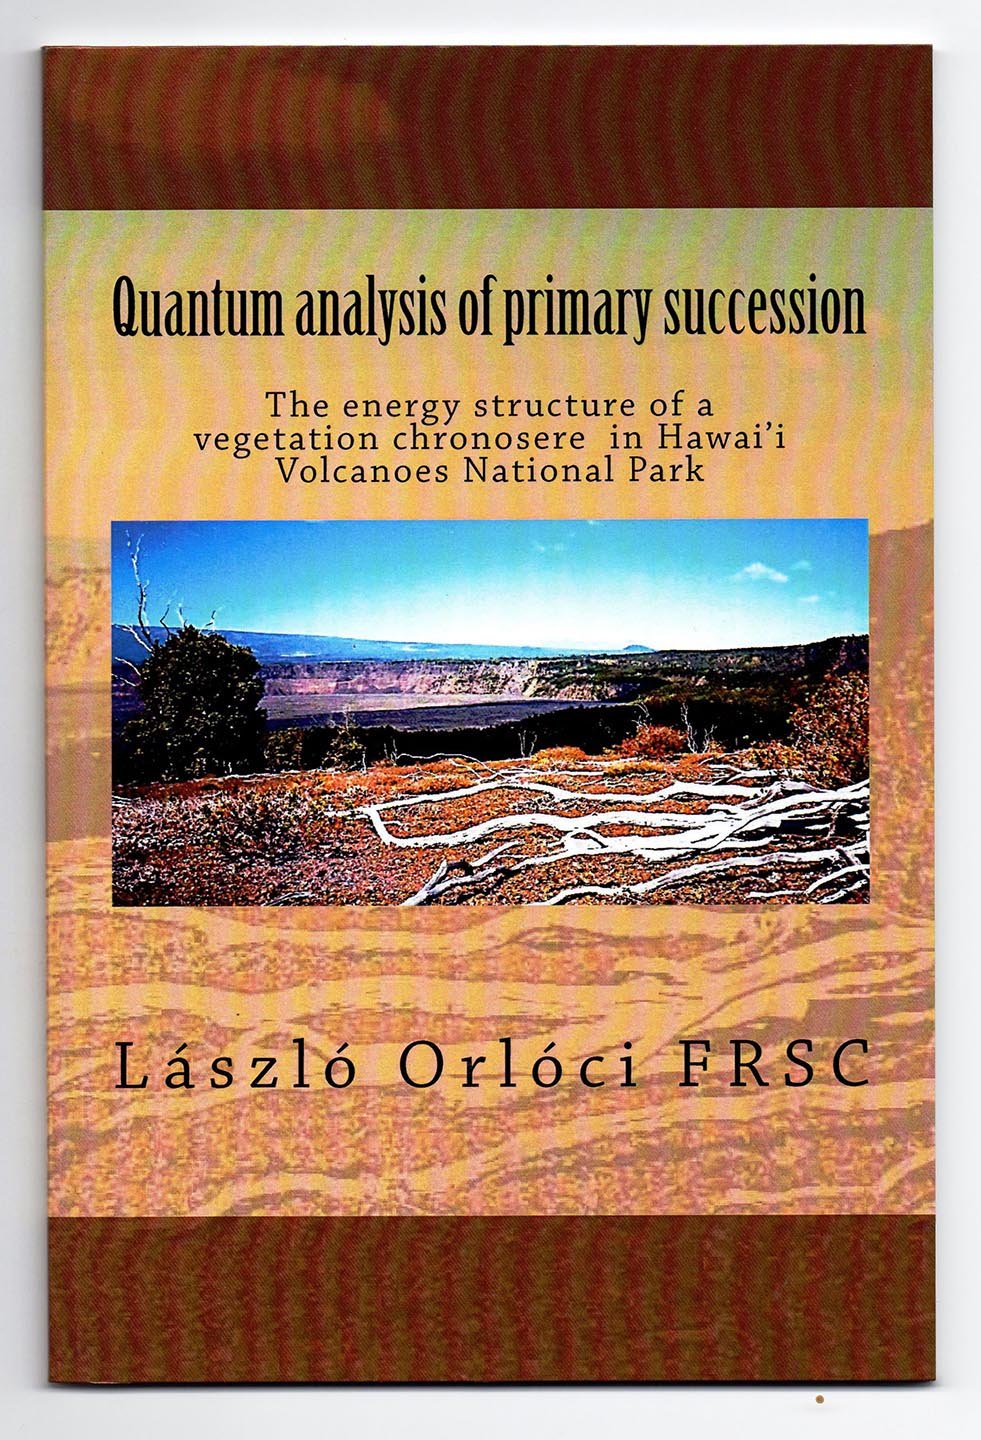 Quantum analysis of primary succession: The energy structure of a vegetation chronosere in Hawai'i Vocanoes National Park